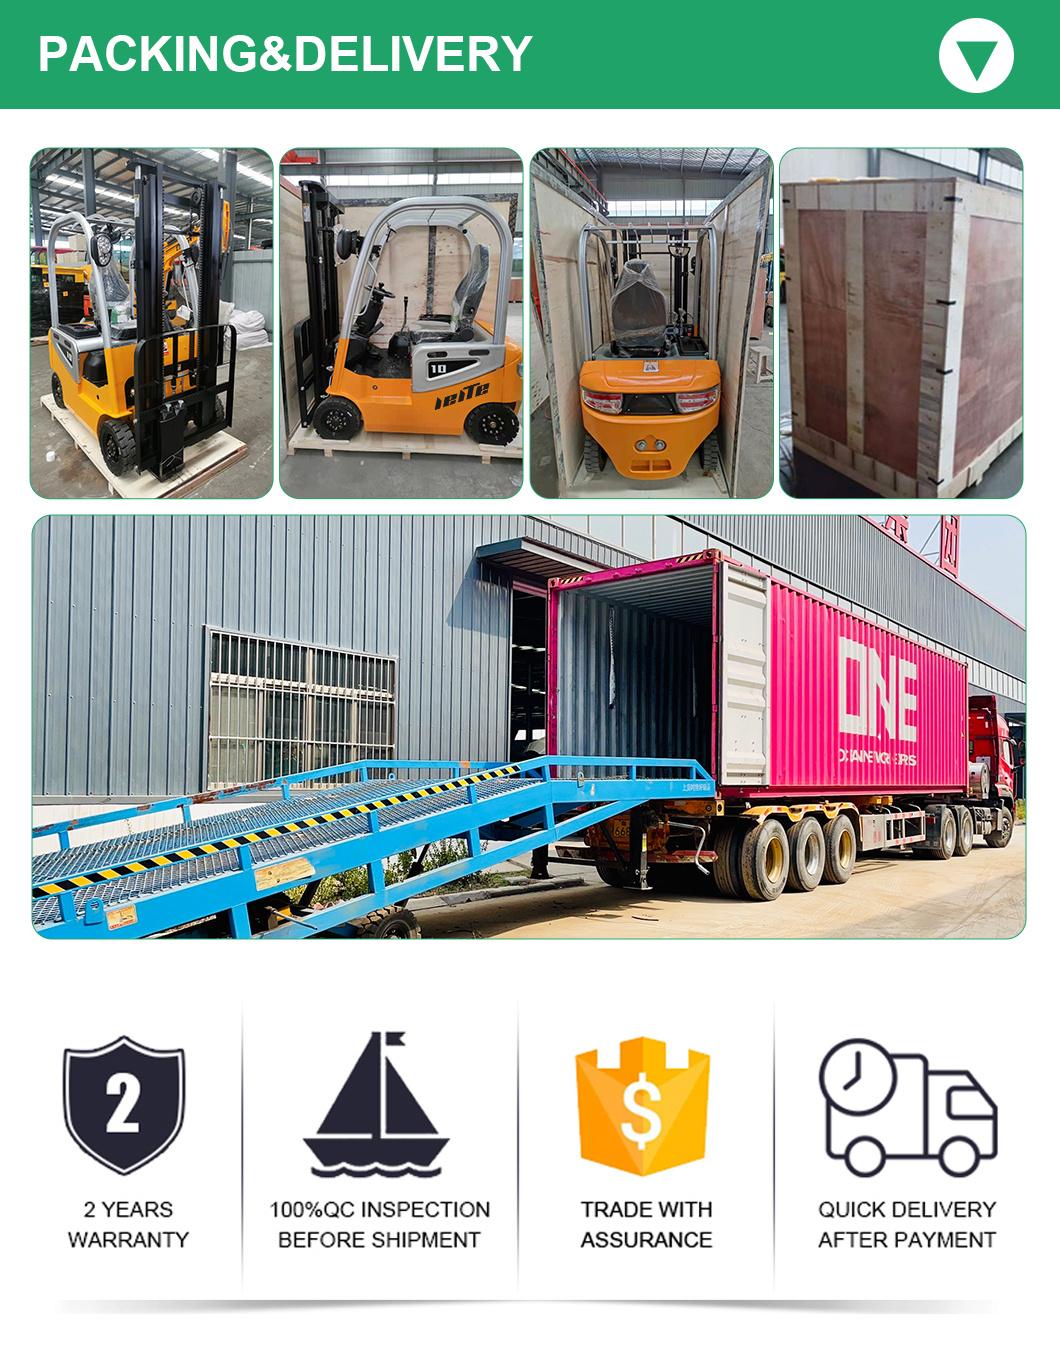 Hot Sale 1-3 Ton Electric Forklift Truck International Brand Controller Economy Forklift High Performance with CE Electric Forklift with Attachment